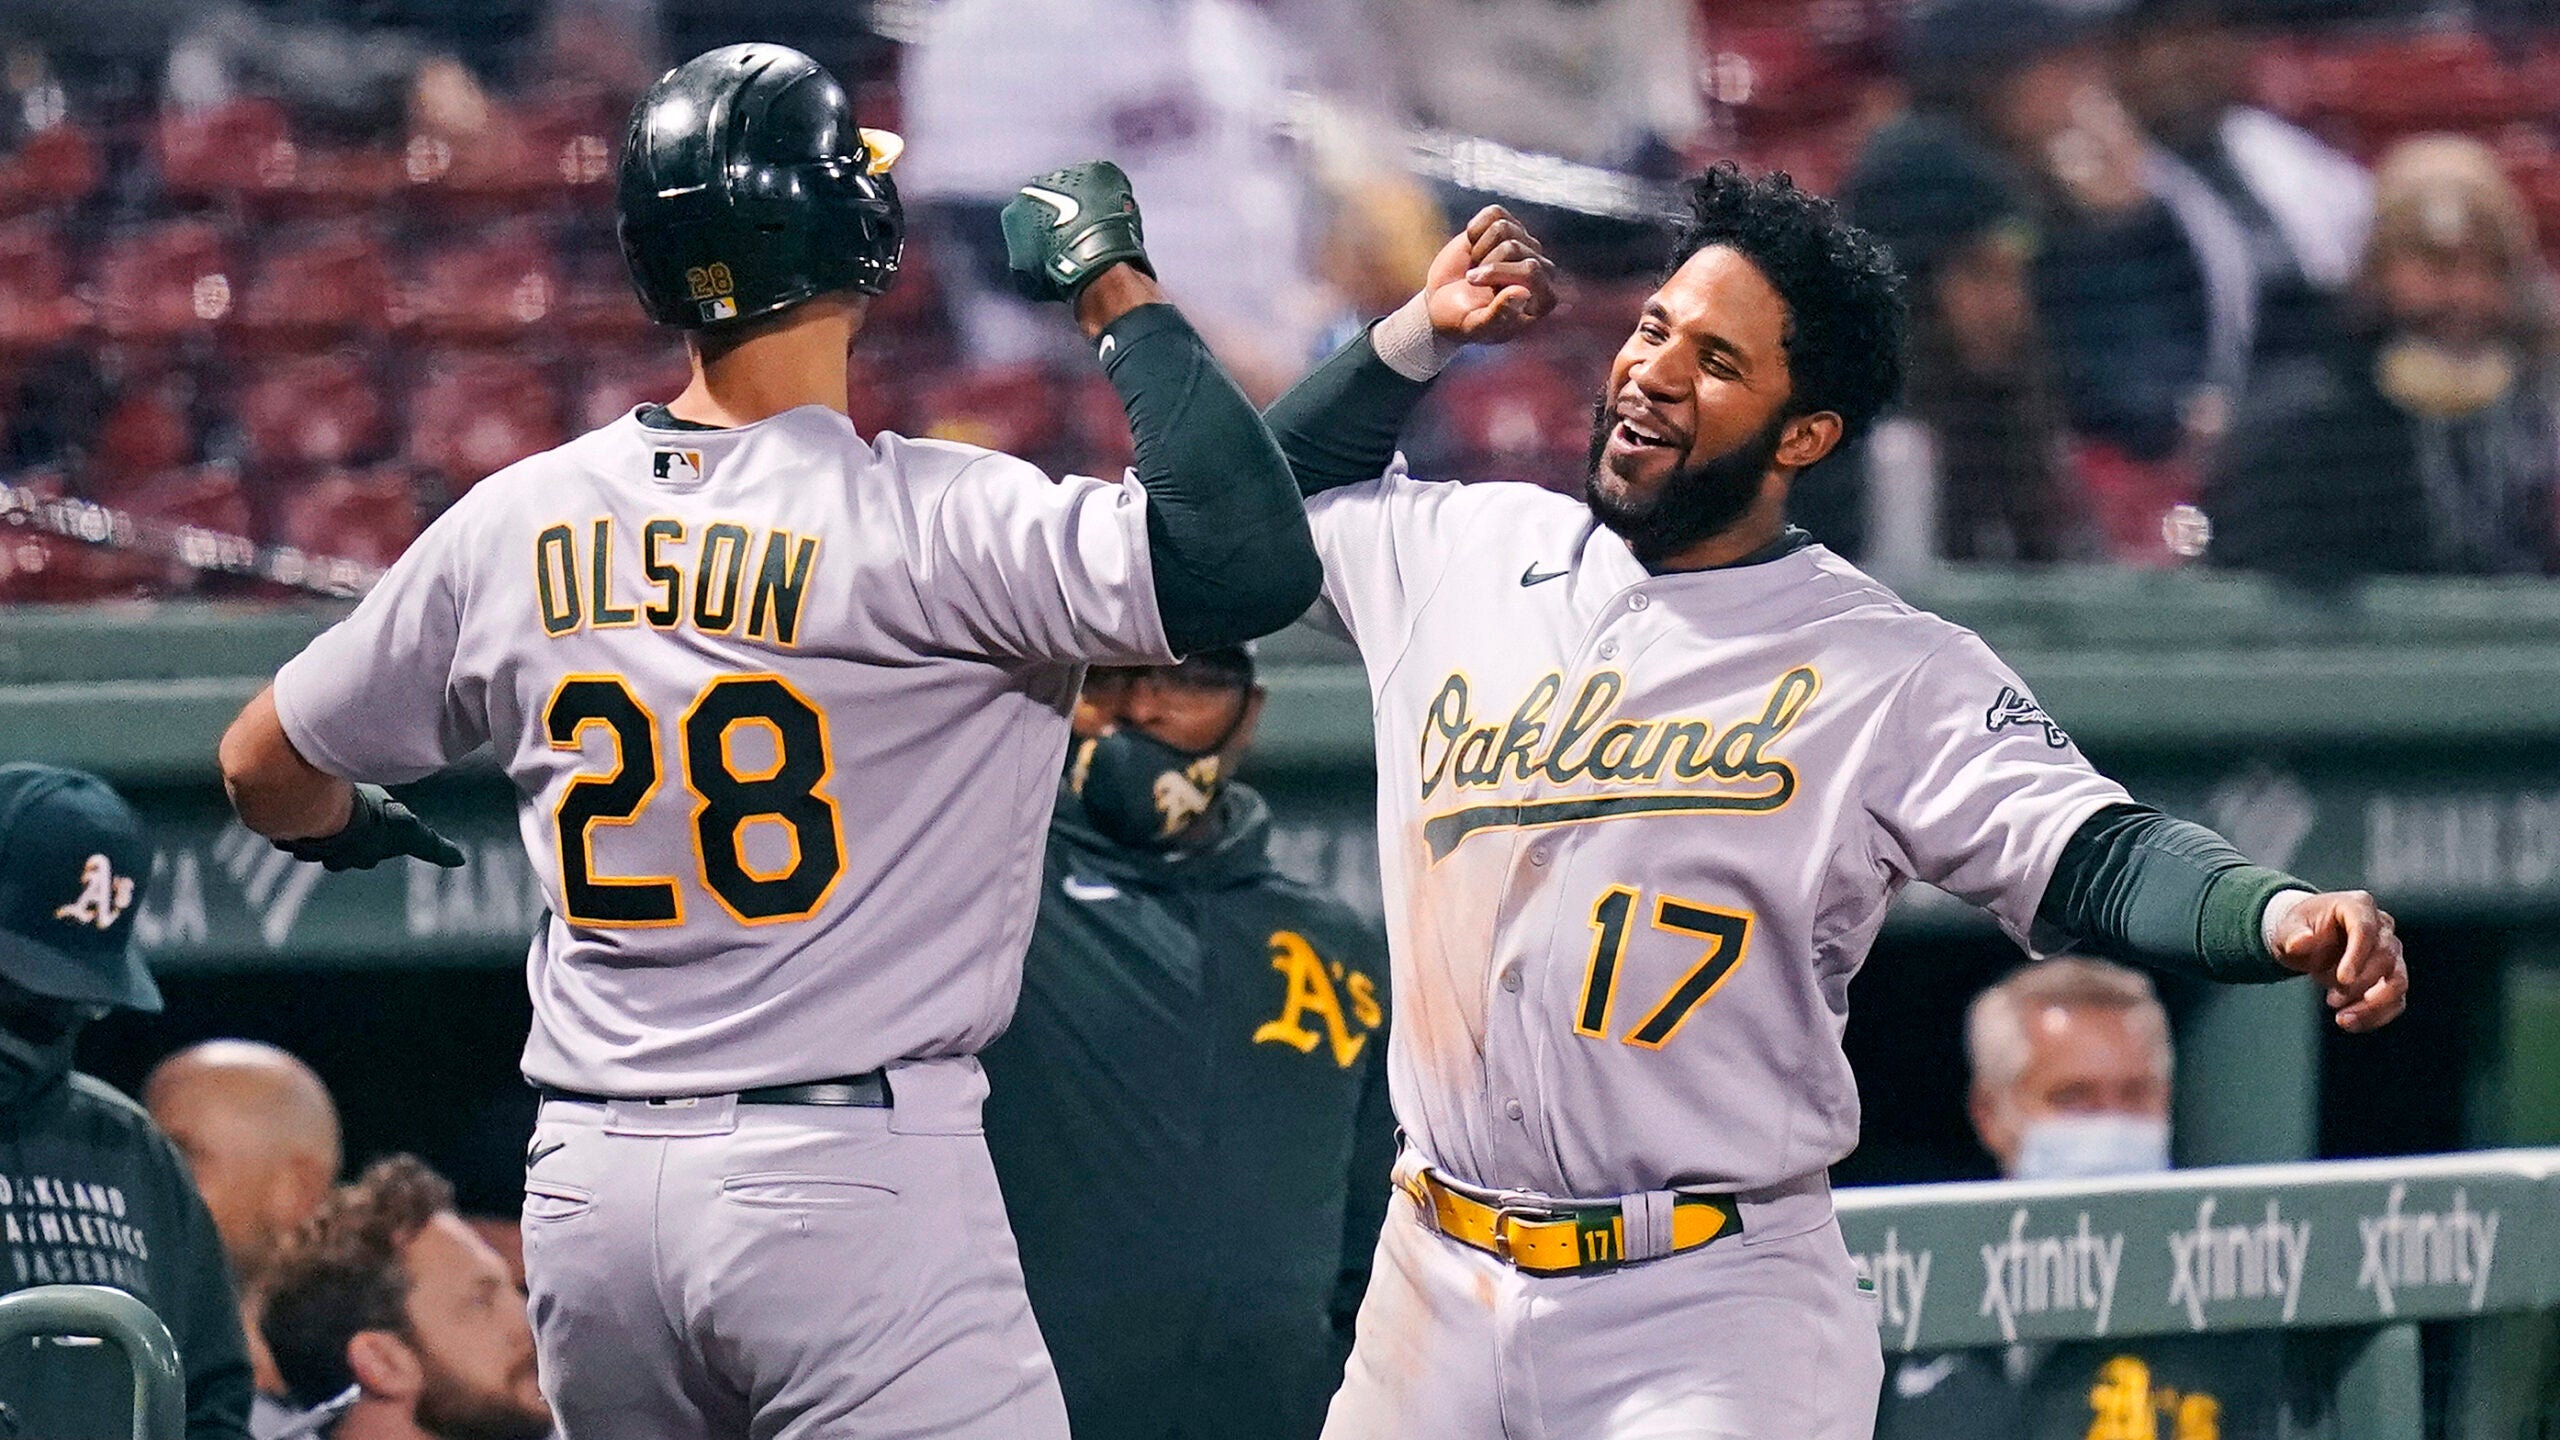 Olson's 4 RBIs lead A's past Rangers for 3rd straight win